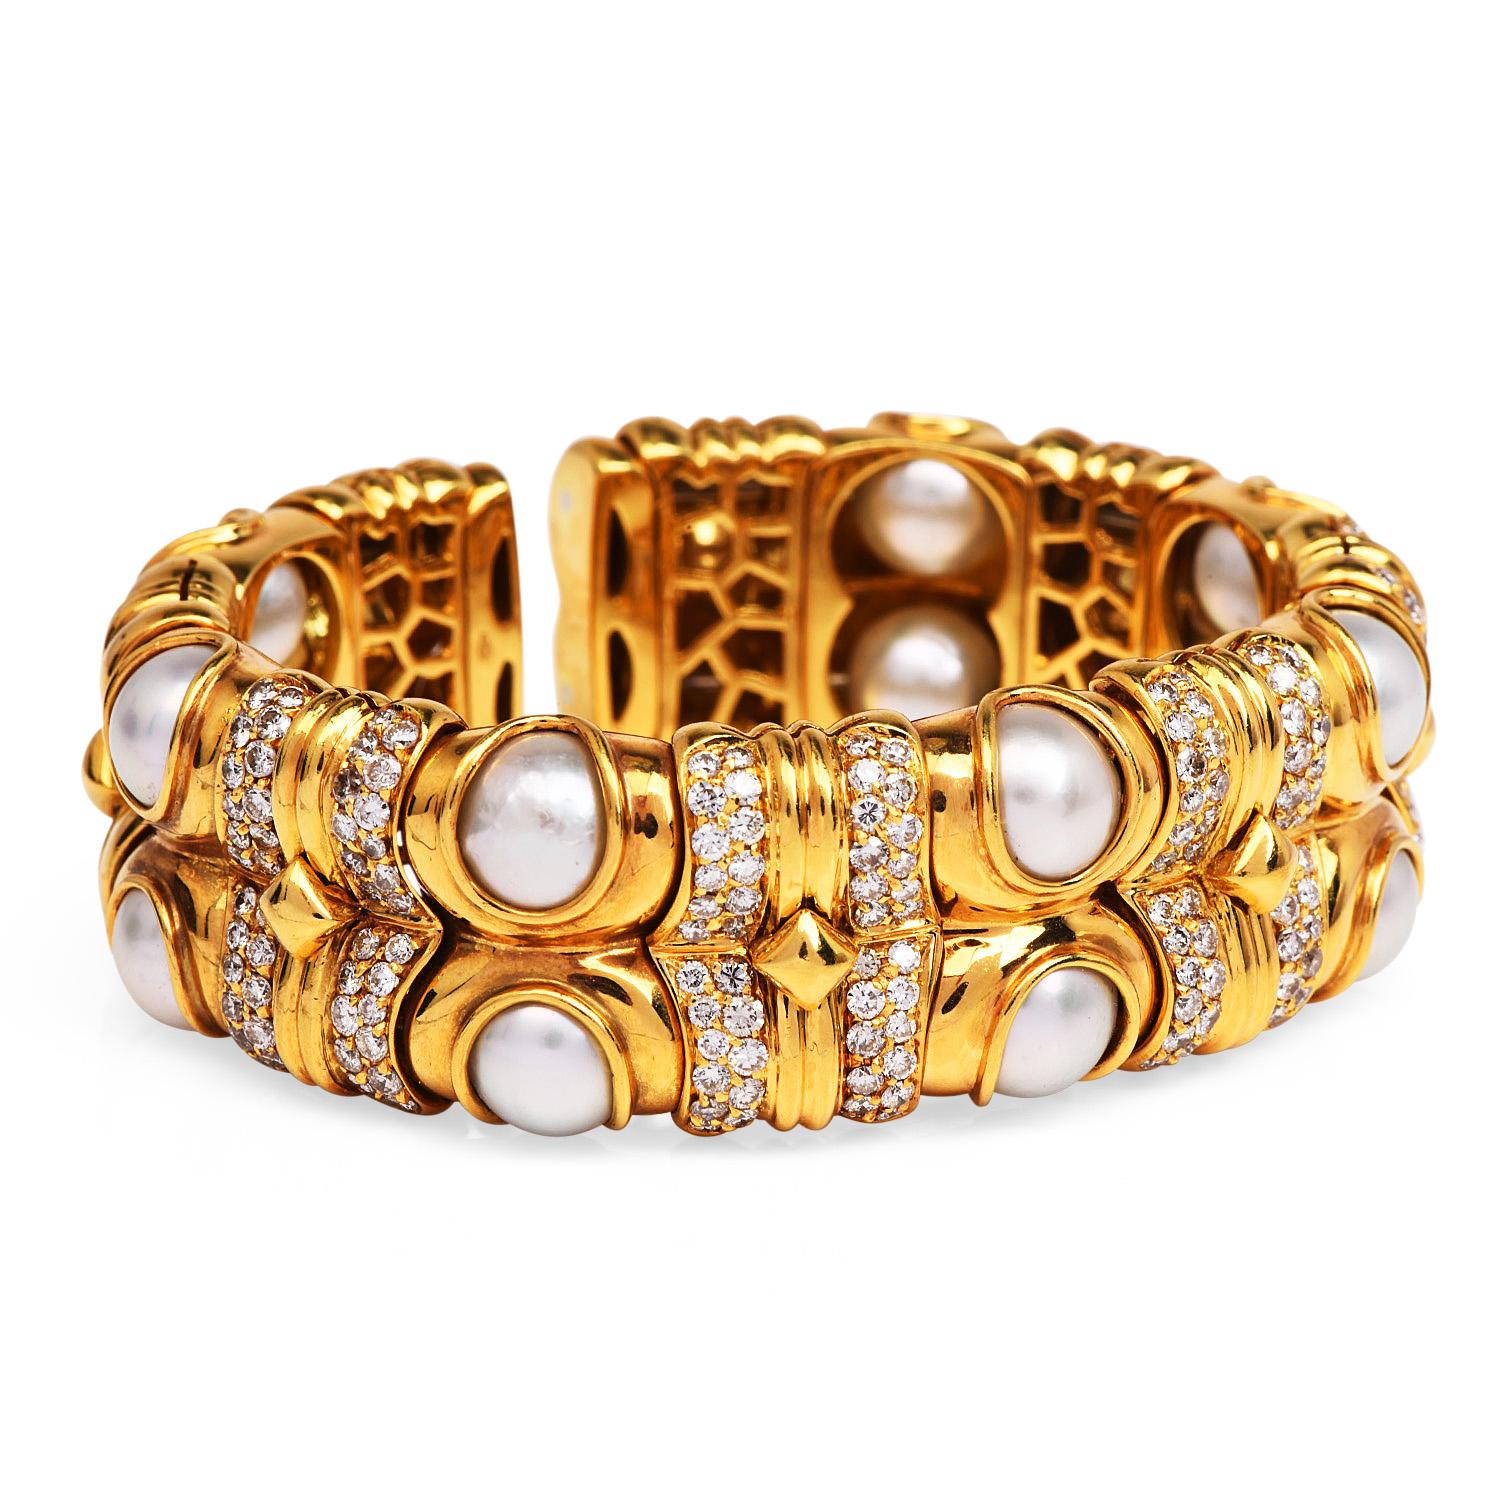 The perfect compliment for a High-quality strand of pearls!

This 1980's bangle cuff bracelet was created in heavy 18K yellow gold, weighing approximately 80.1 grams.

The geometric flexible link design is enhanced by  14 High-luster 8 mm grayish